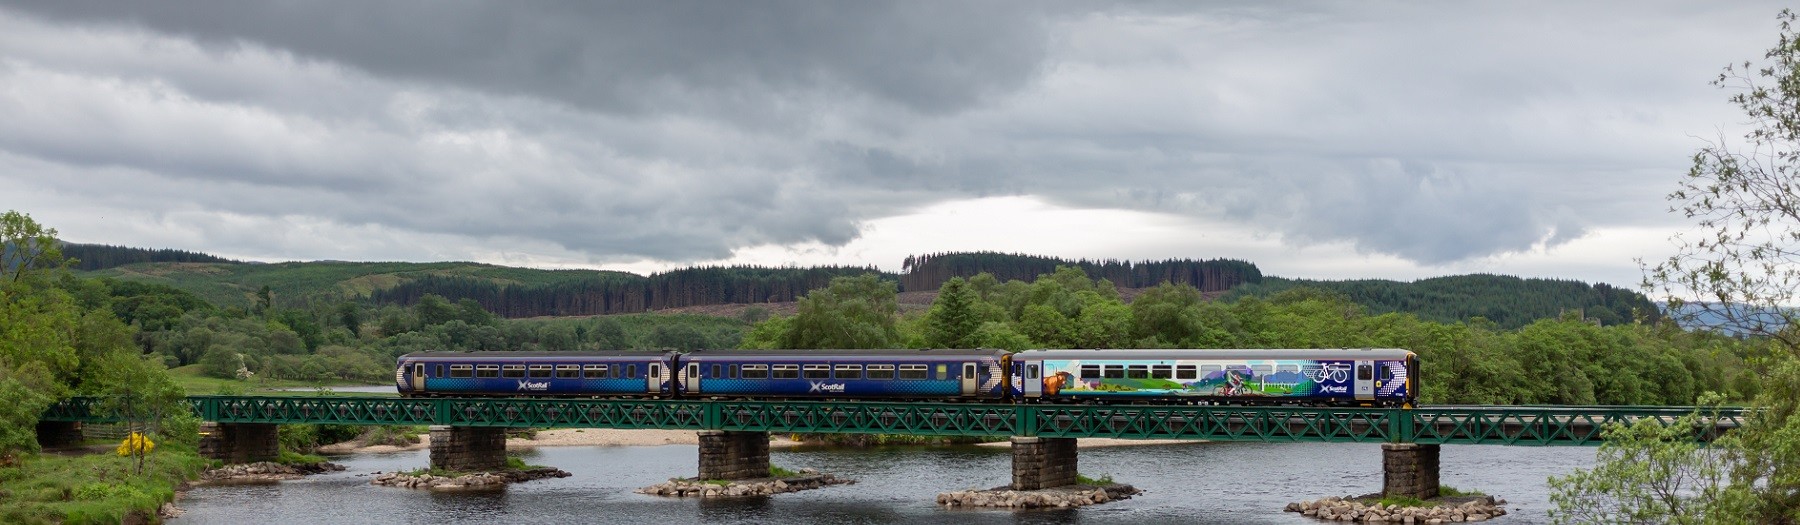 ScotRail Highland Explorer carriage on a bridge over the water